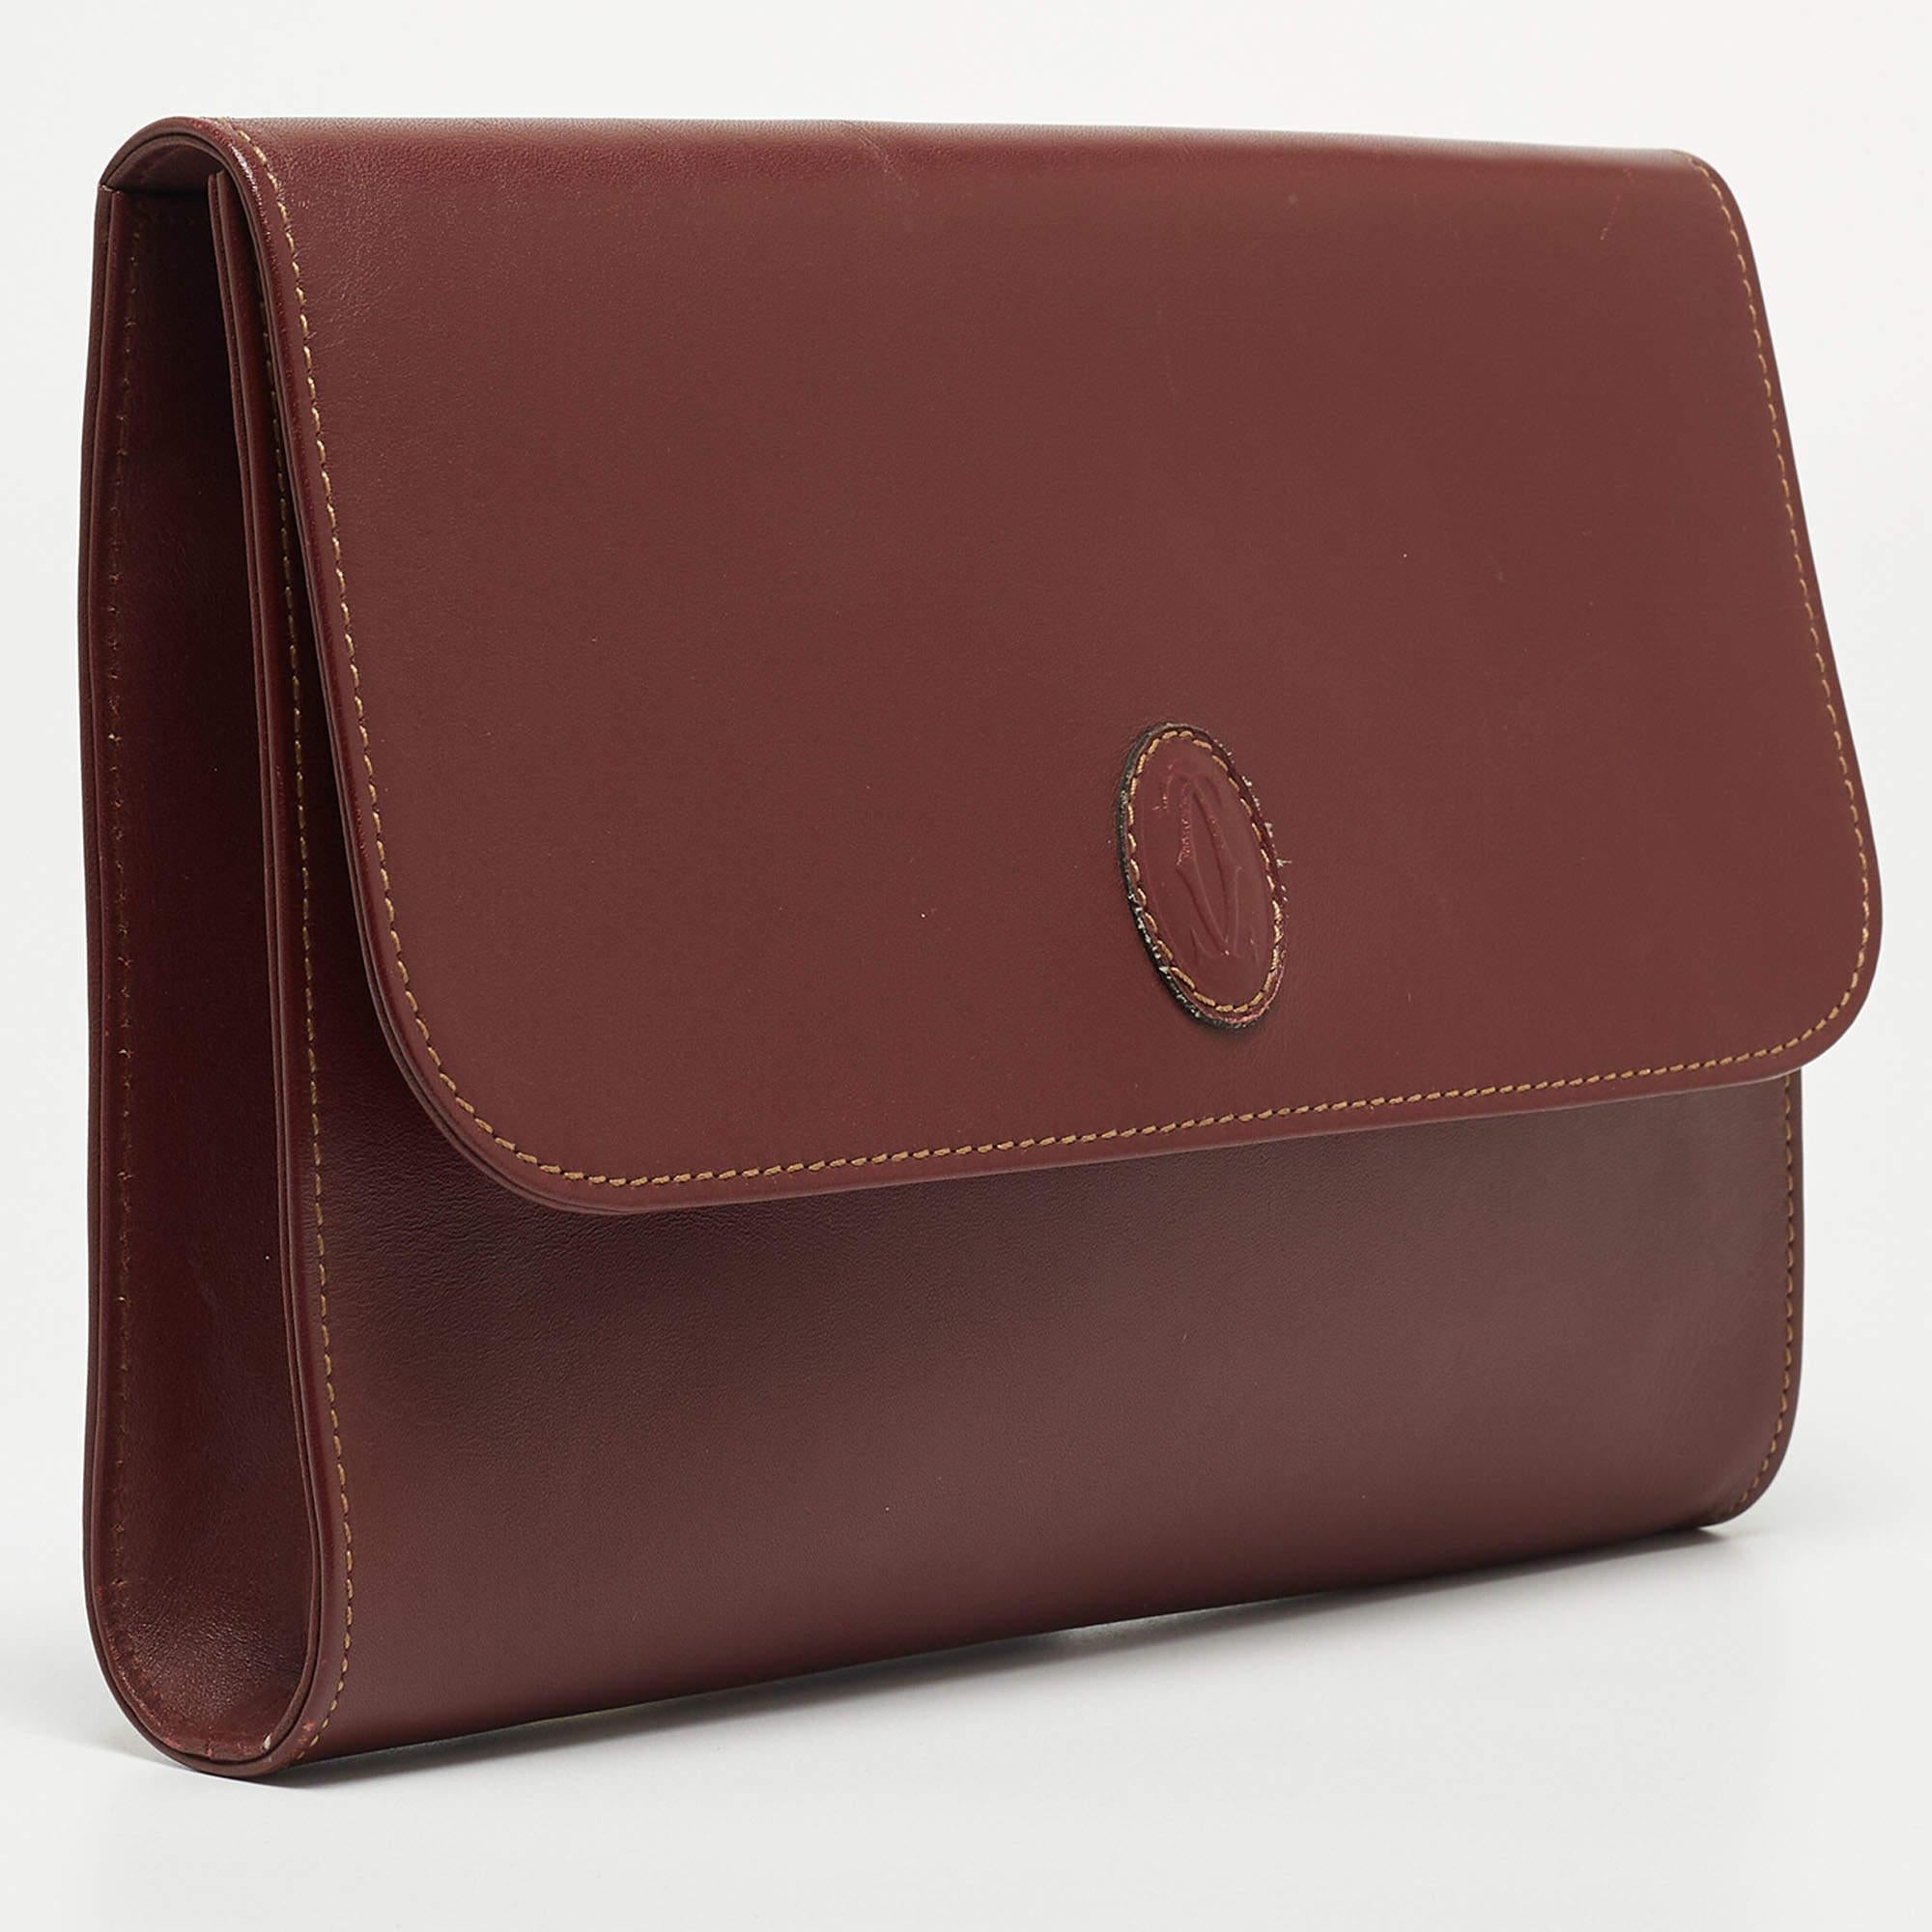 With a functional design, this Cartier clutch is a reliable accessory. Crafted from leather, it displays brand detailing on the front flap, and its lined interior will keep your valuables neatly.

